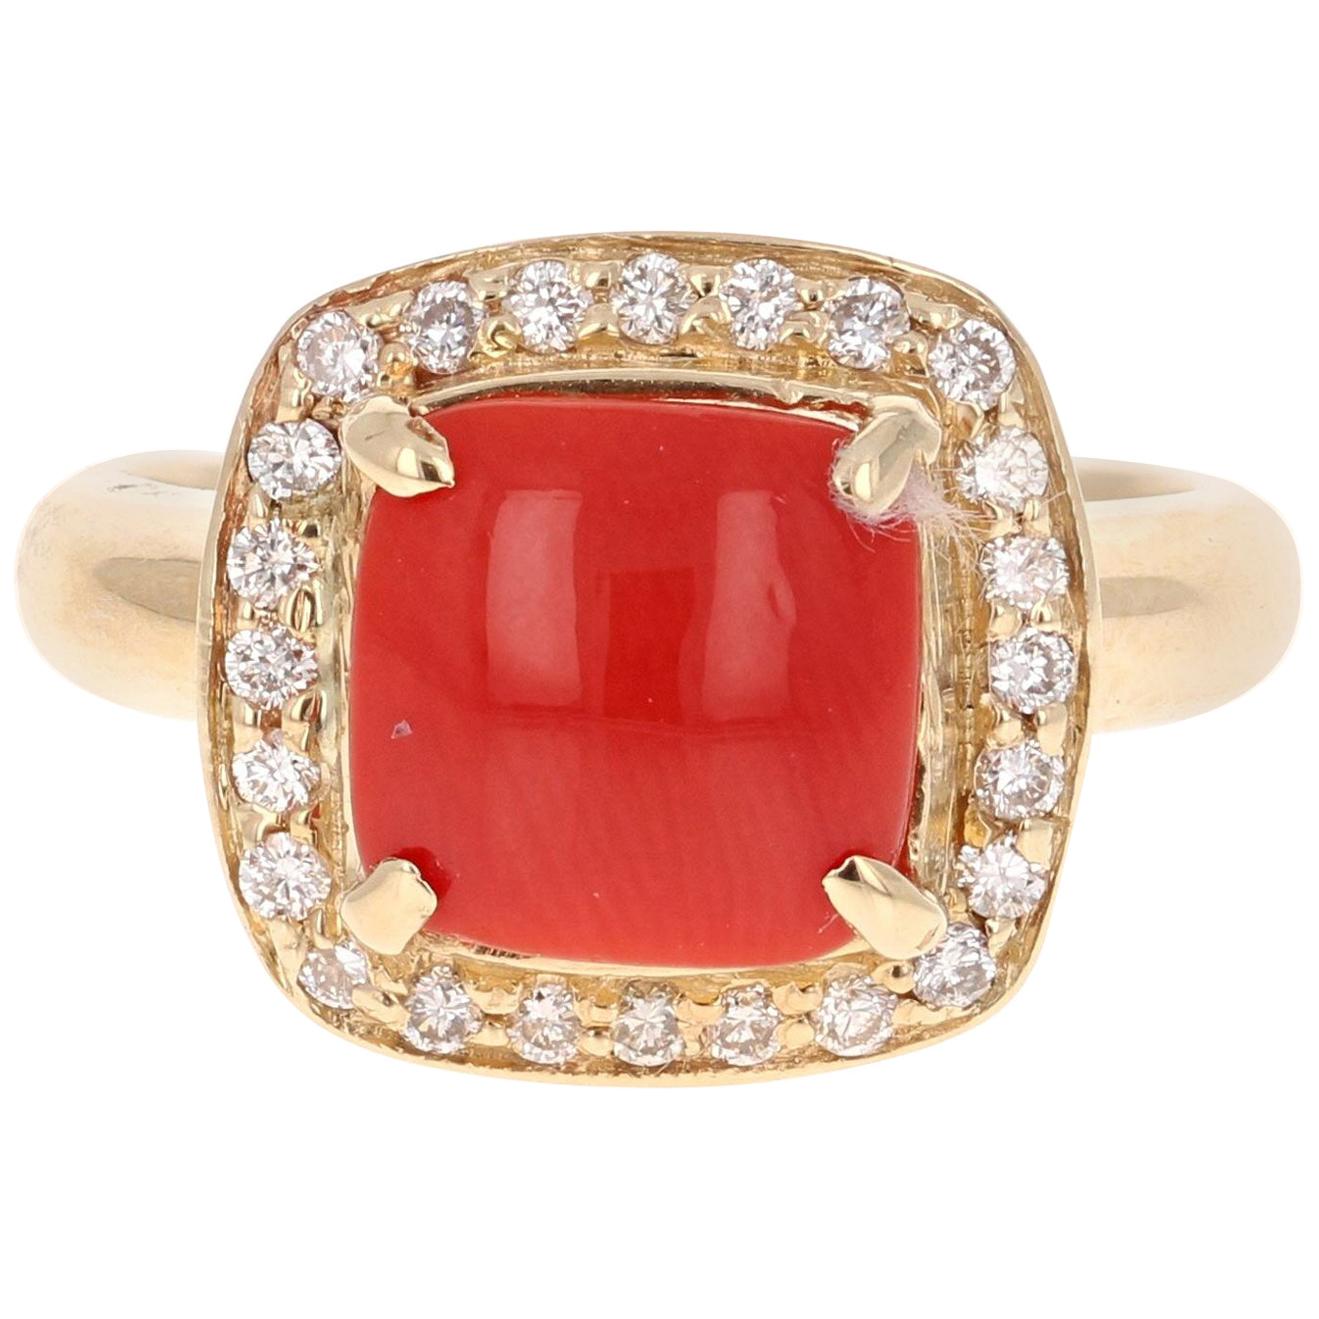 Coral Diamond 14 Karat Yellow Gold Halo Ring

The Coral weighs 1.70 carats and is adorned by 24 Round Cut White Diamonds weighing 0.32 Carats. The Total Carat Weight of this beauty is 2.02 carats. 
It is crafted in 14K Yellow Gold and weighs 7.8